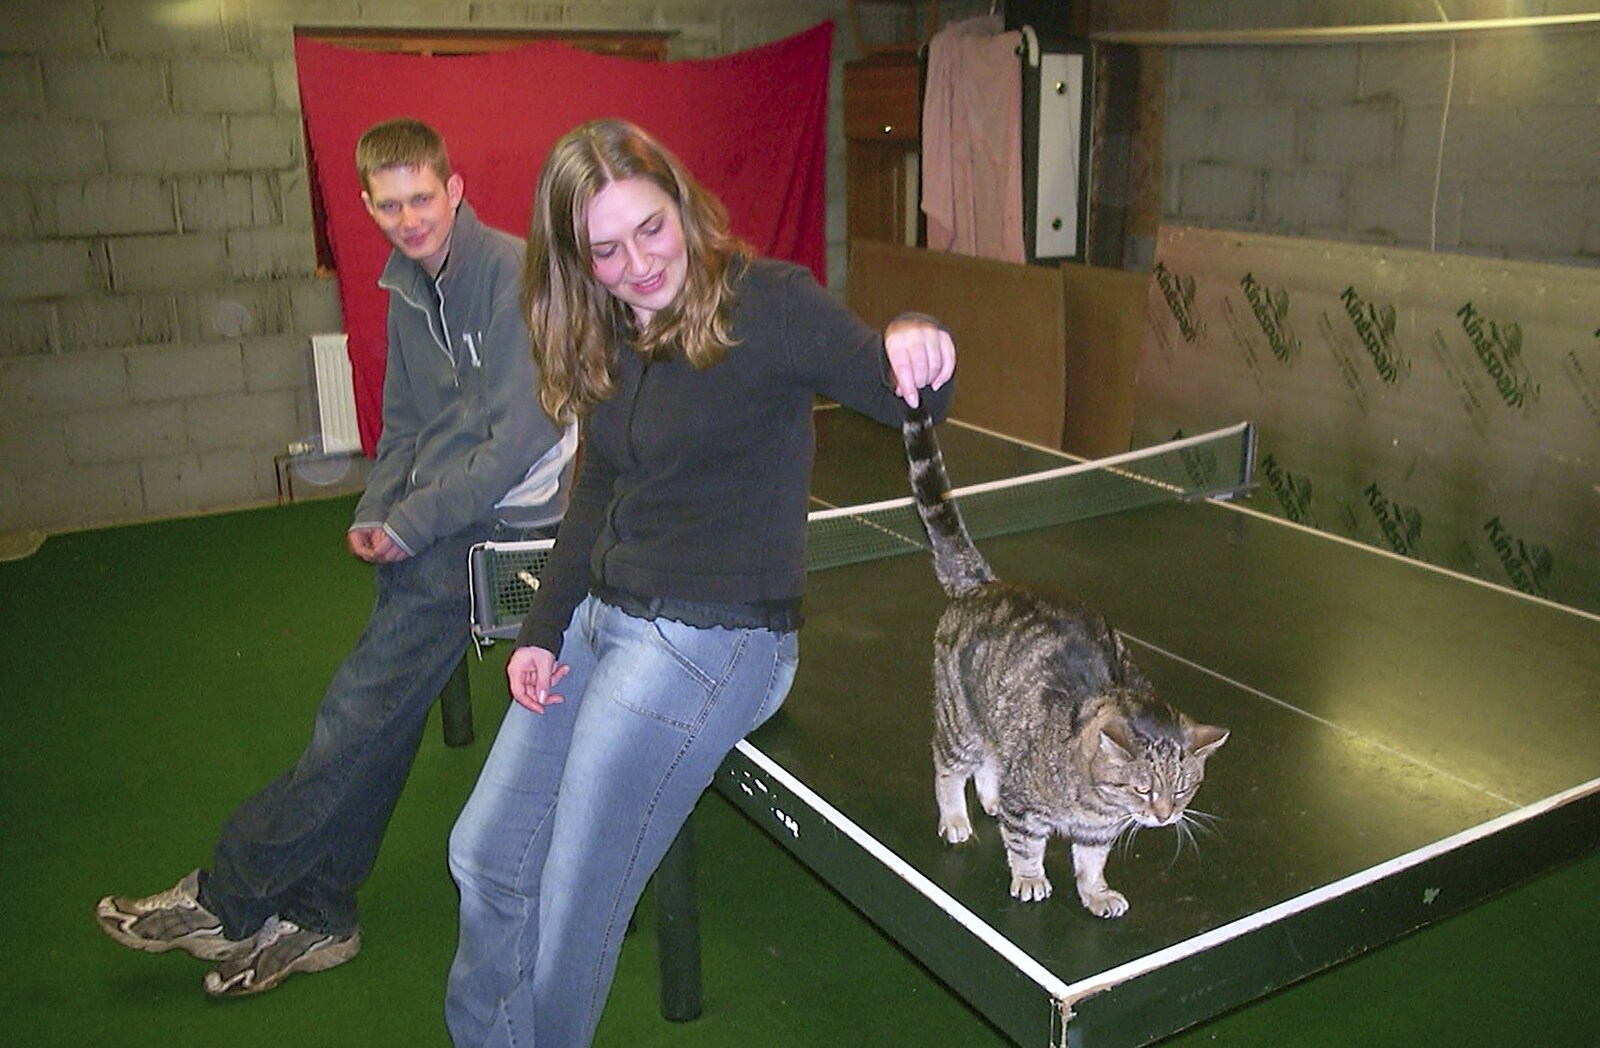 Sophie the cat is on the table-tennis table from Jess and Jen's Party, Pulham St. Mary, Norfolk - 28th February 2004